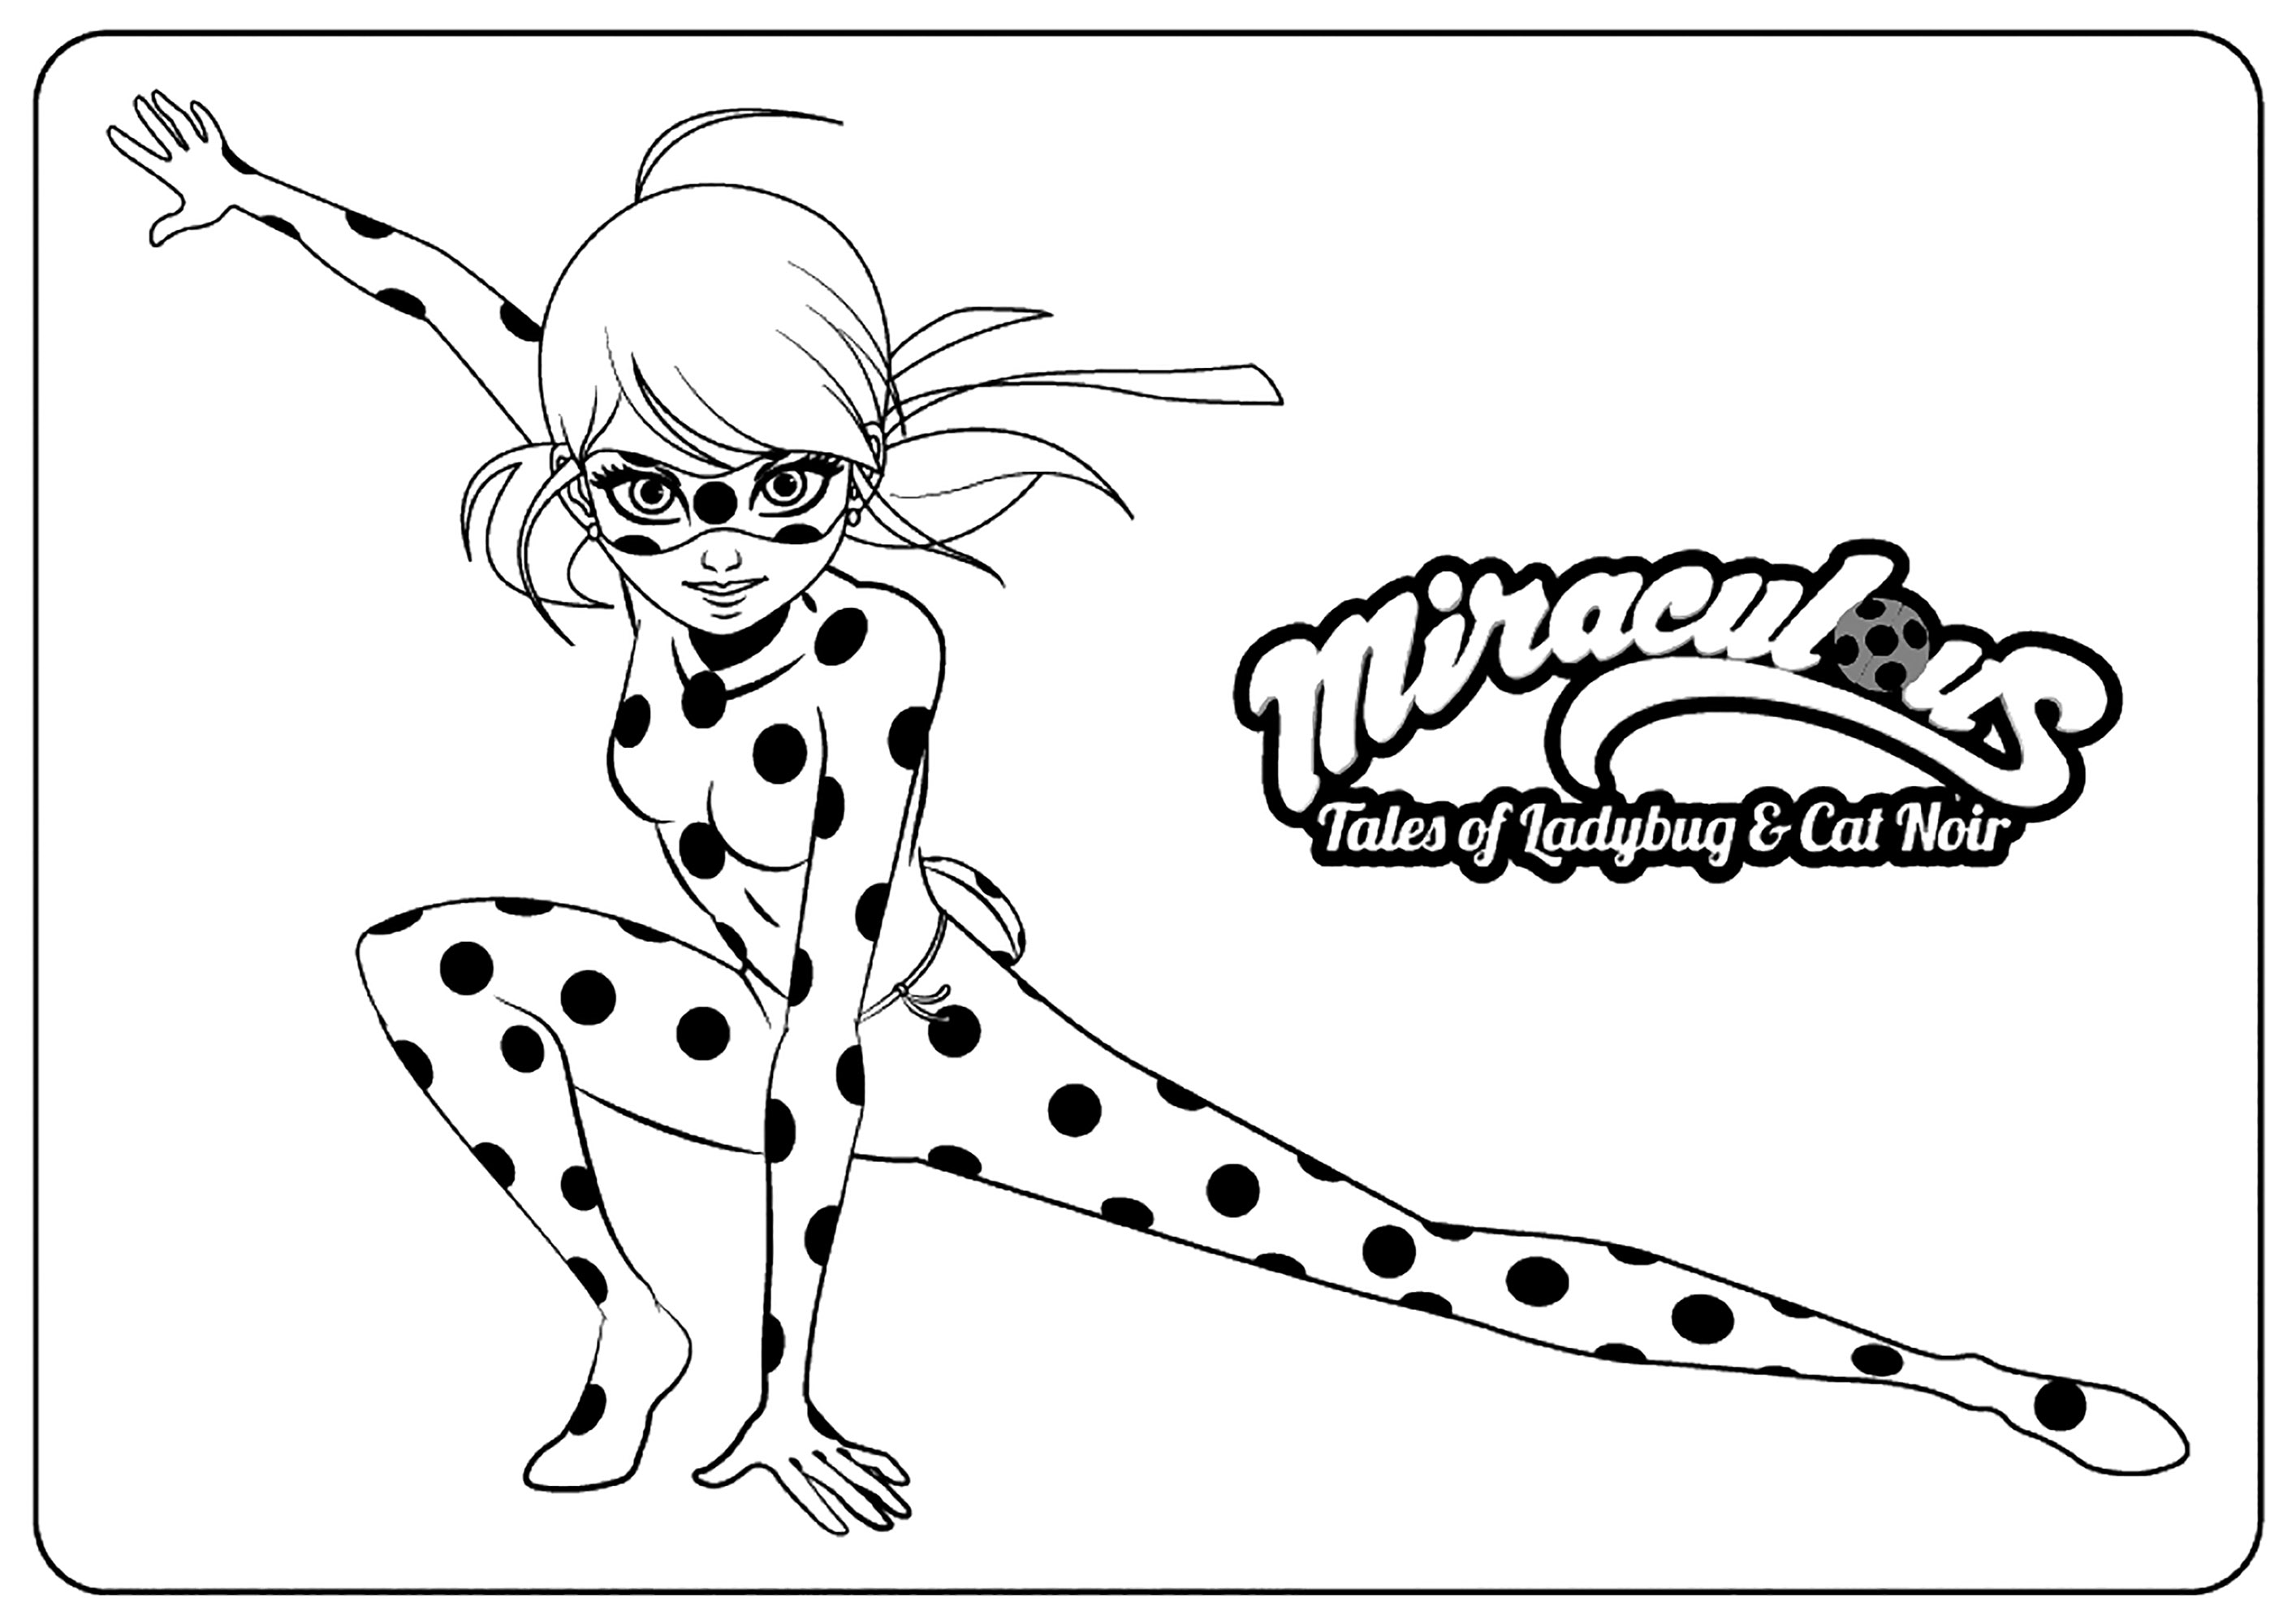 Marinette and Miraculous logo